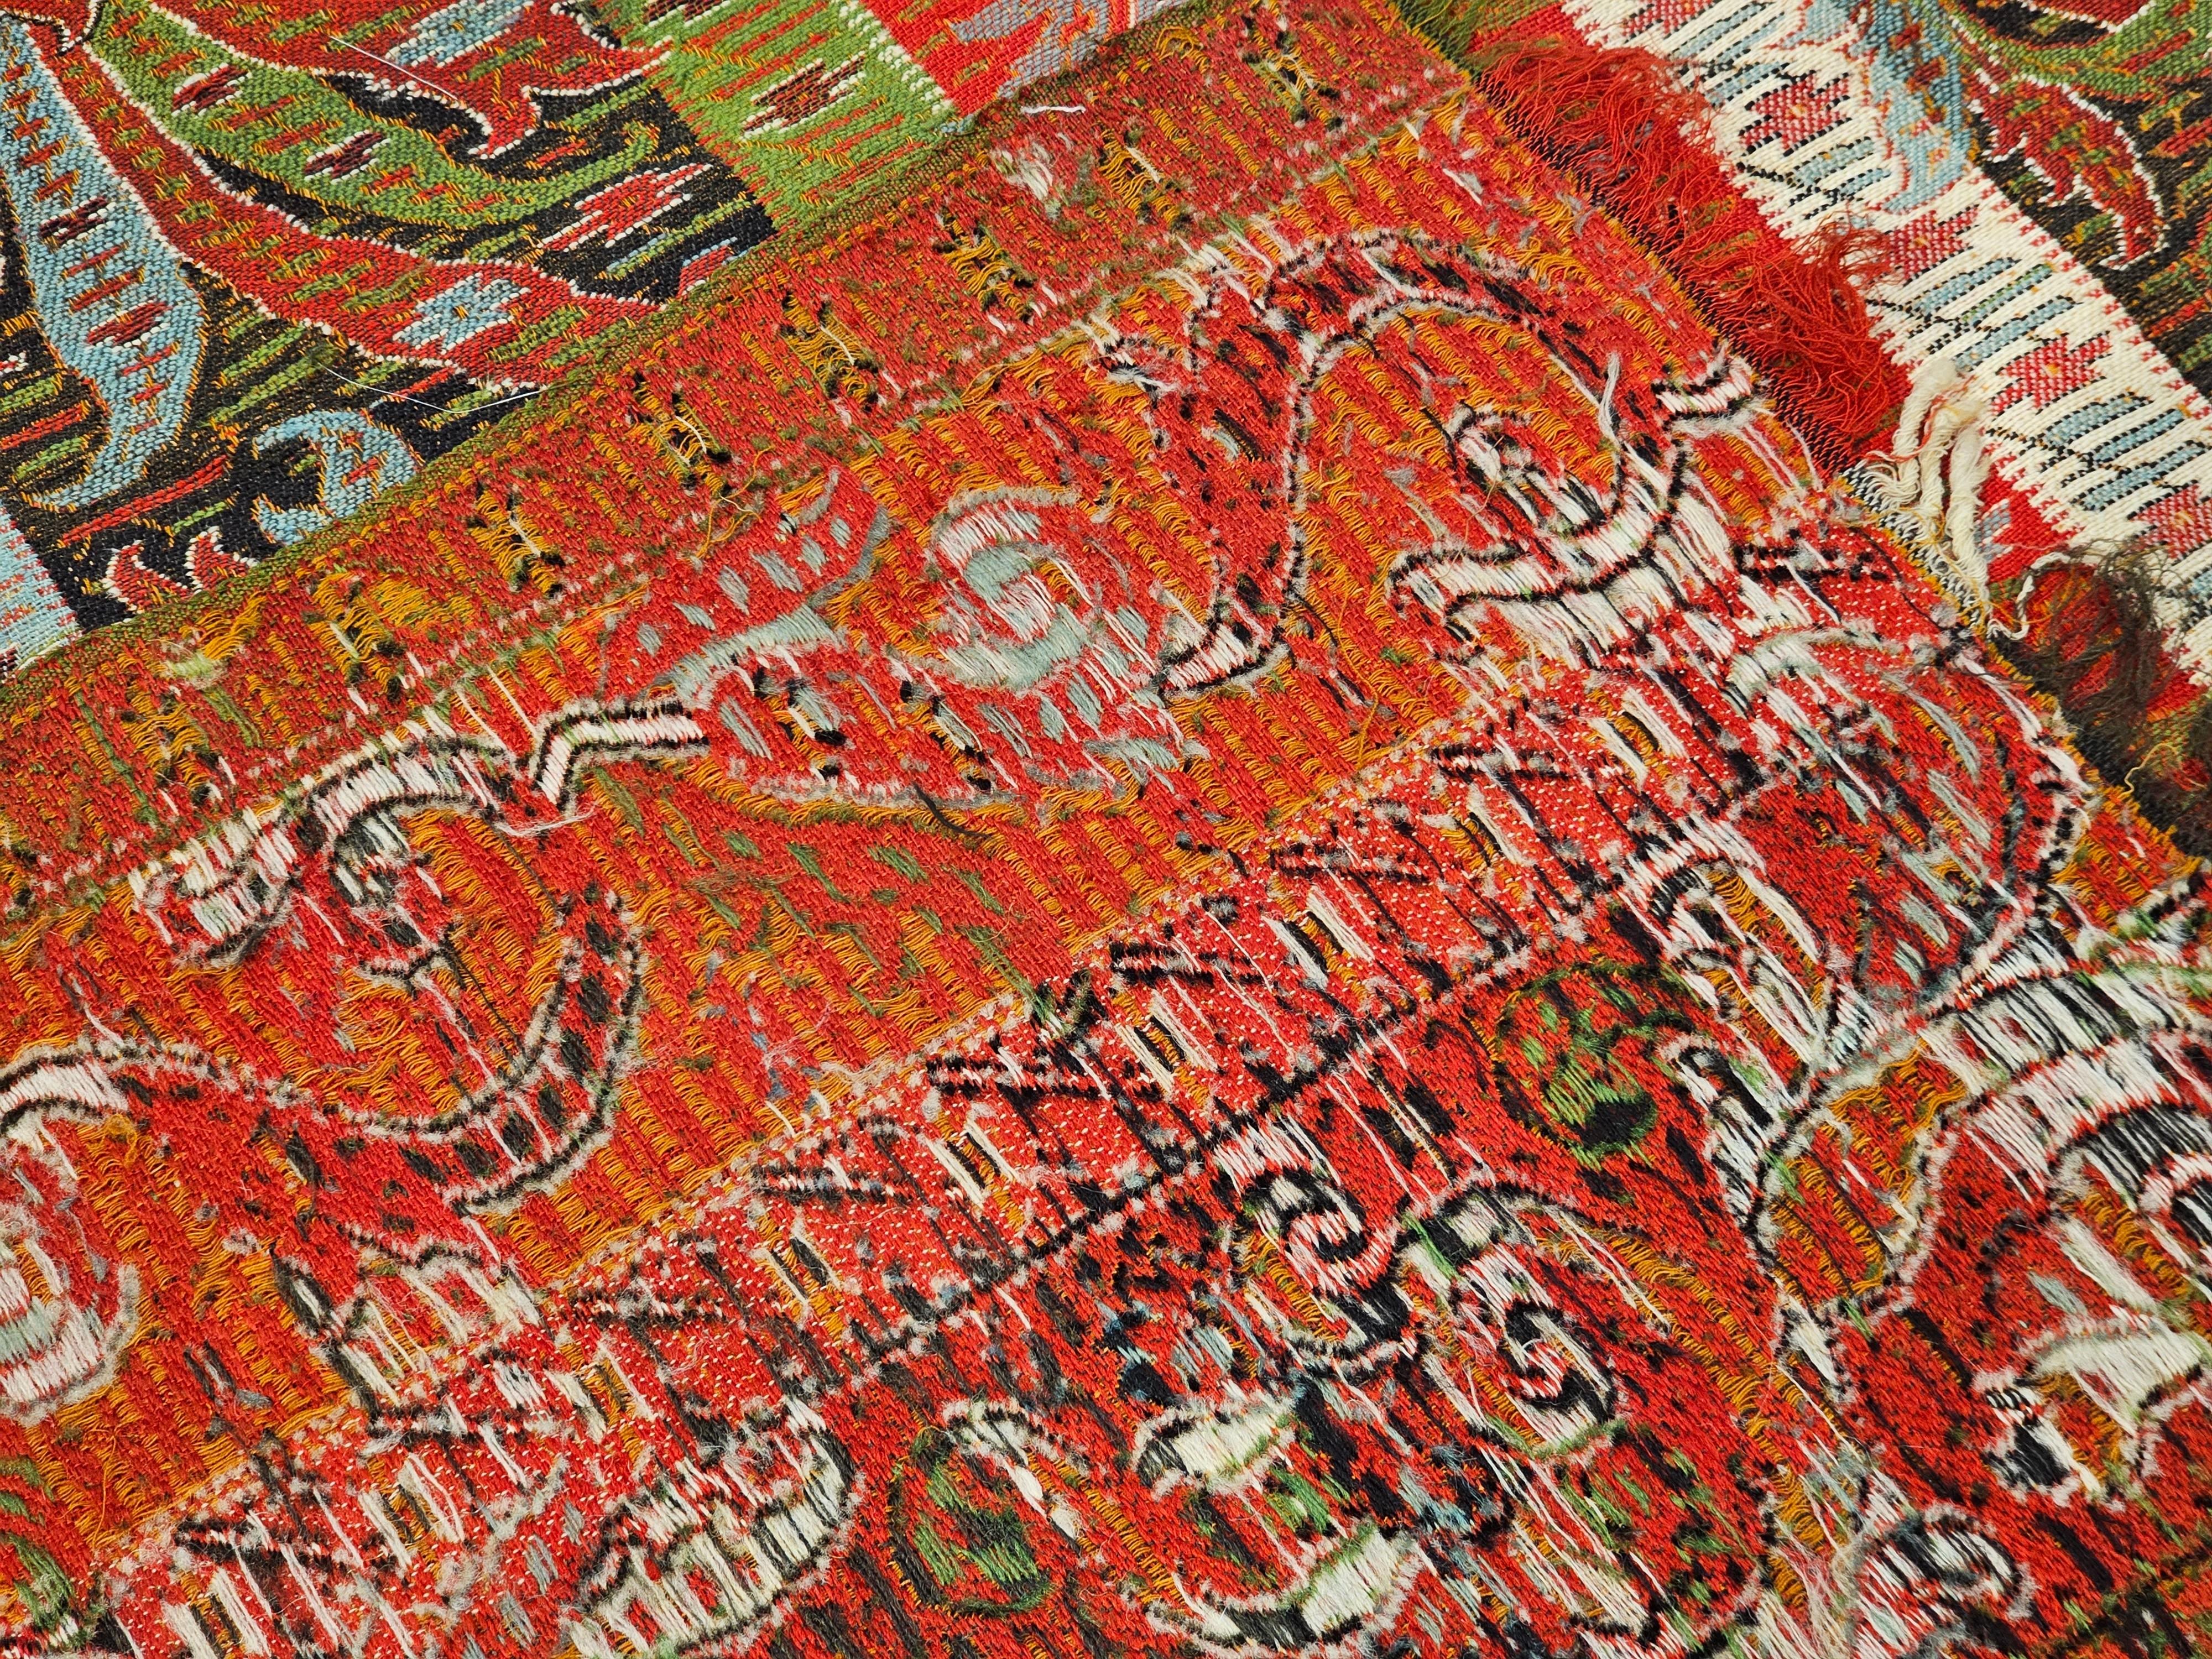 19th Century Hand-Woven Kashmiri Paisley Shawl in Brick Red, Ivory, Black, Green For Sale 2